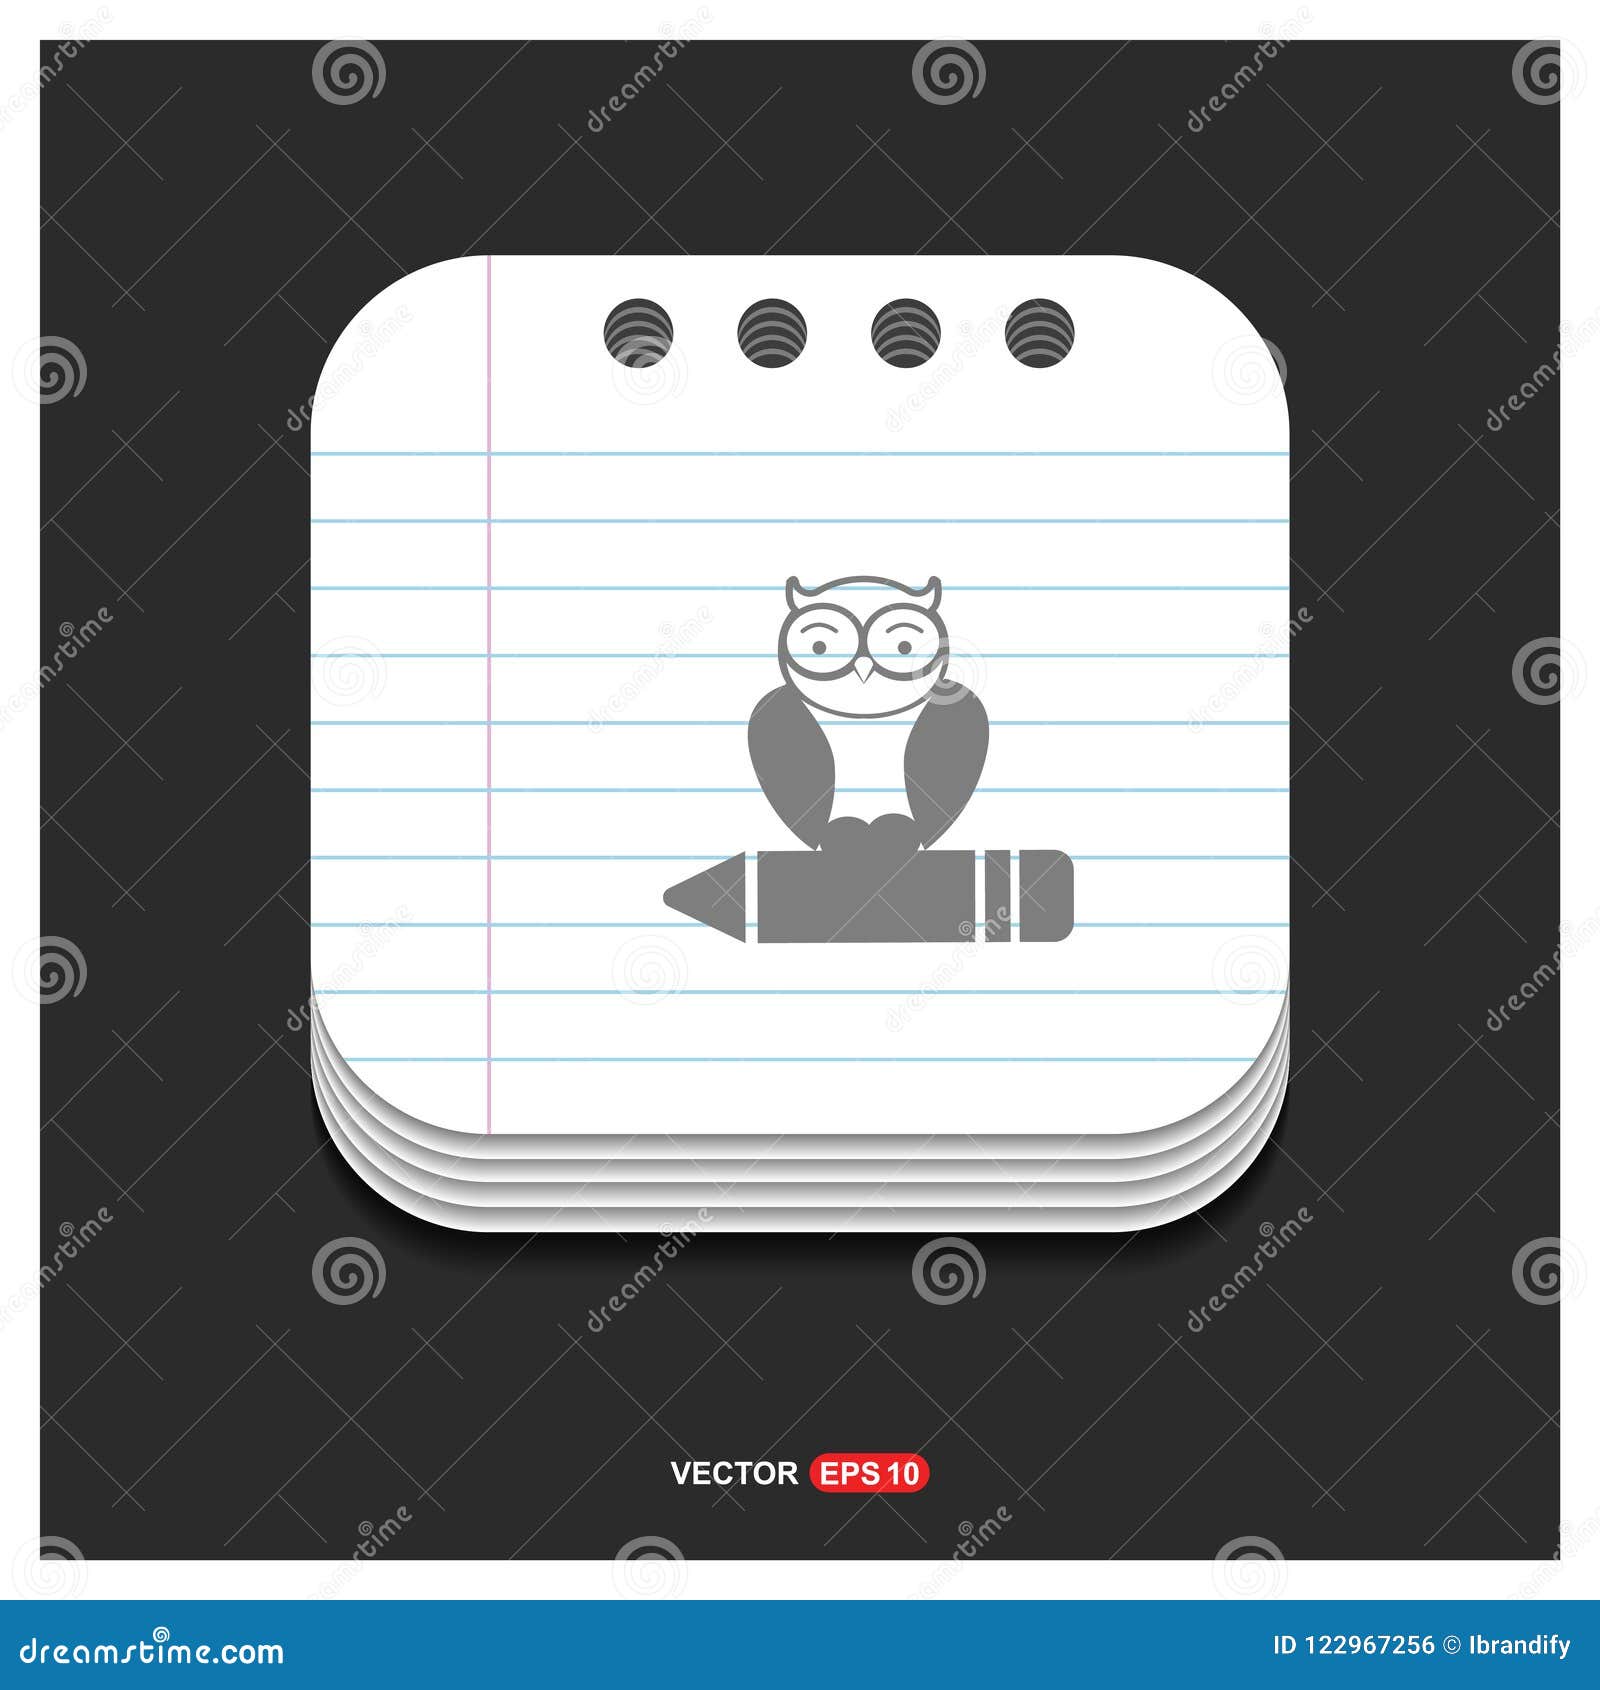 owl icon gray icon on notepad style template  eps 10 free